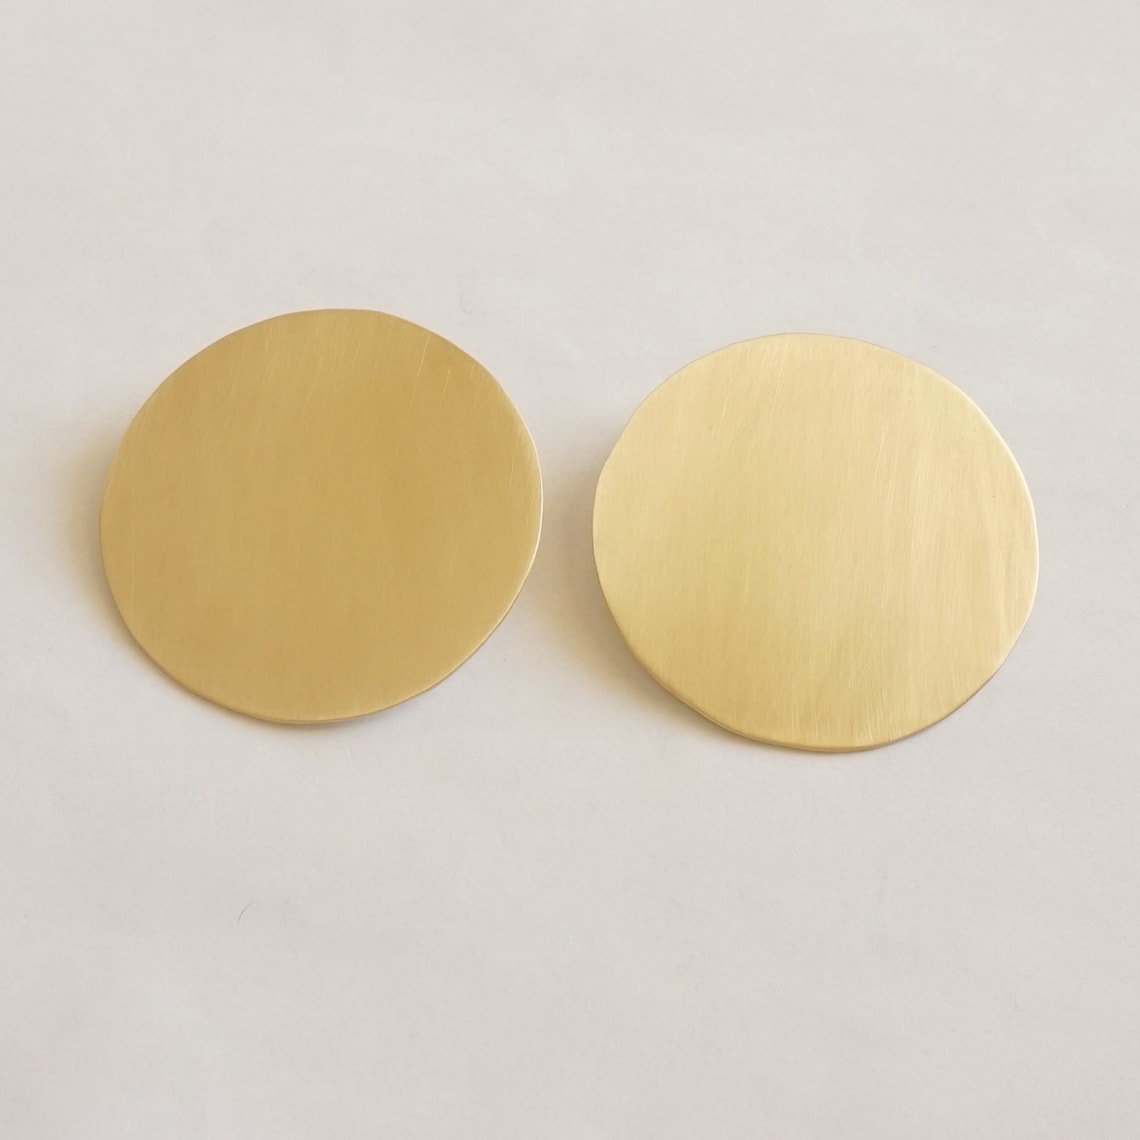 Extra Large Flat Circle Stud Earrings - Statement Brass & Sterling Silver Studs 0256